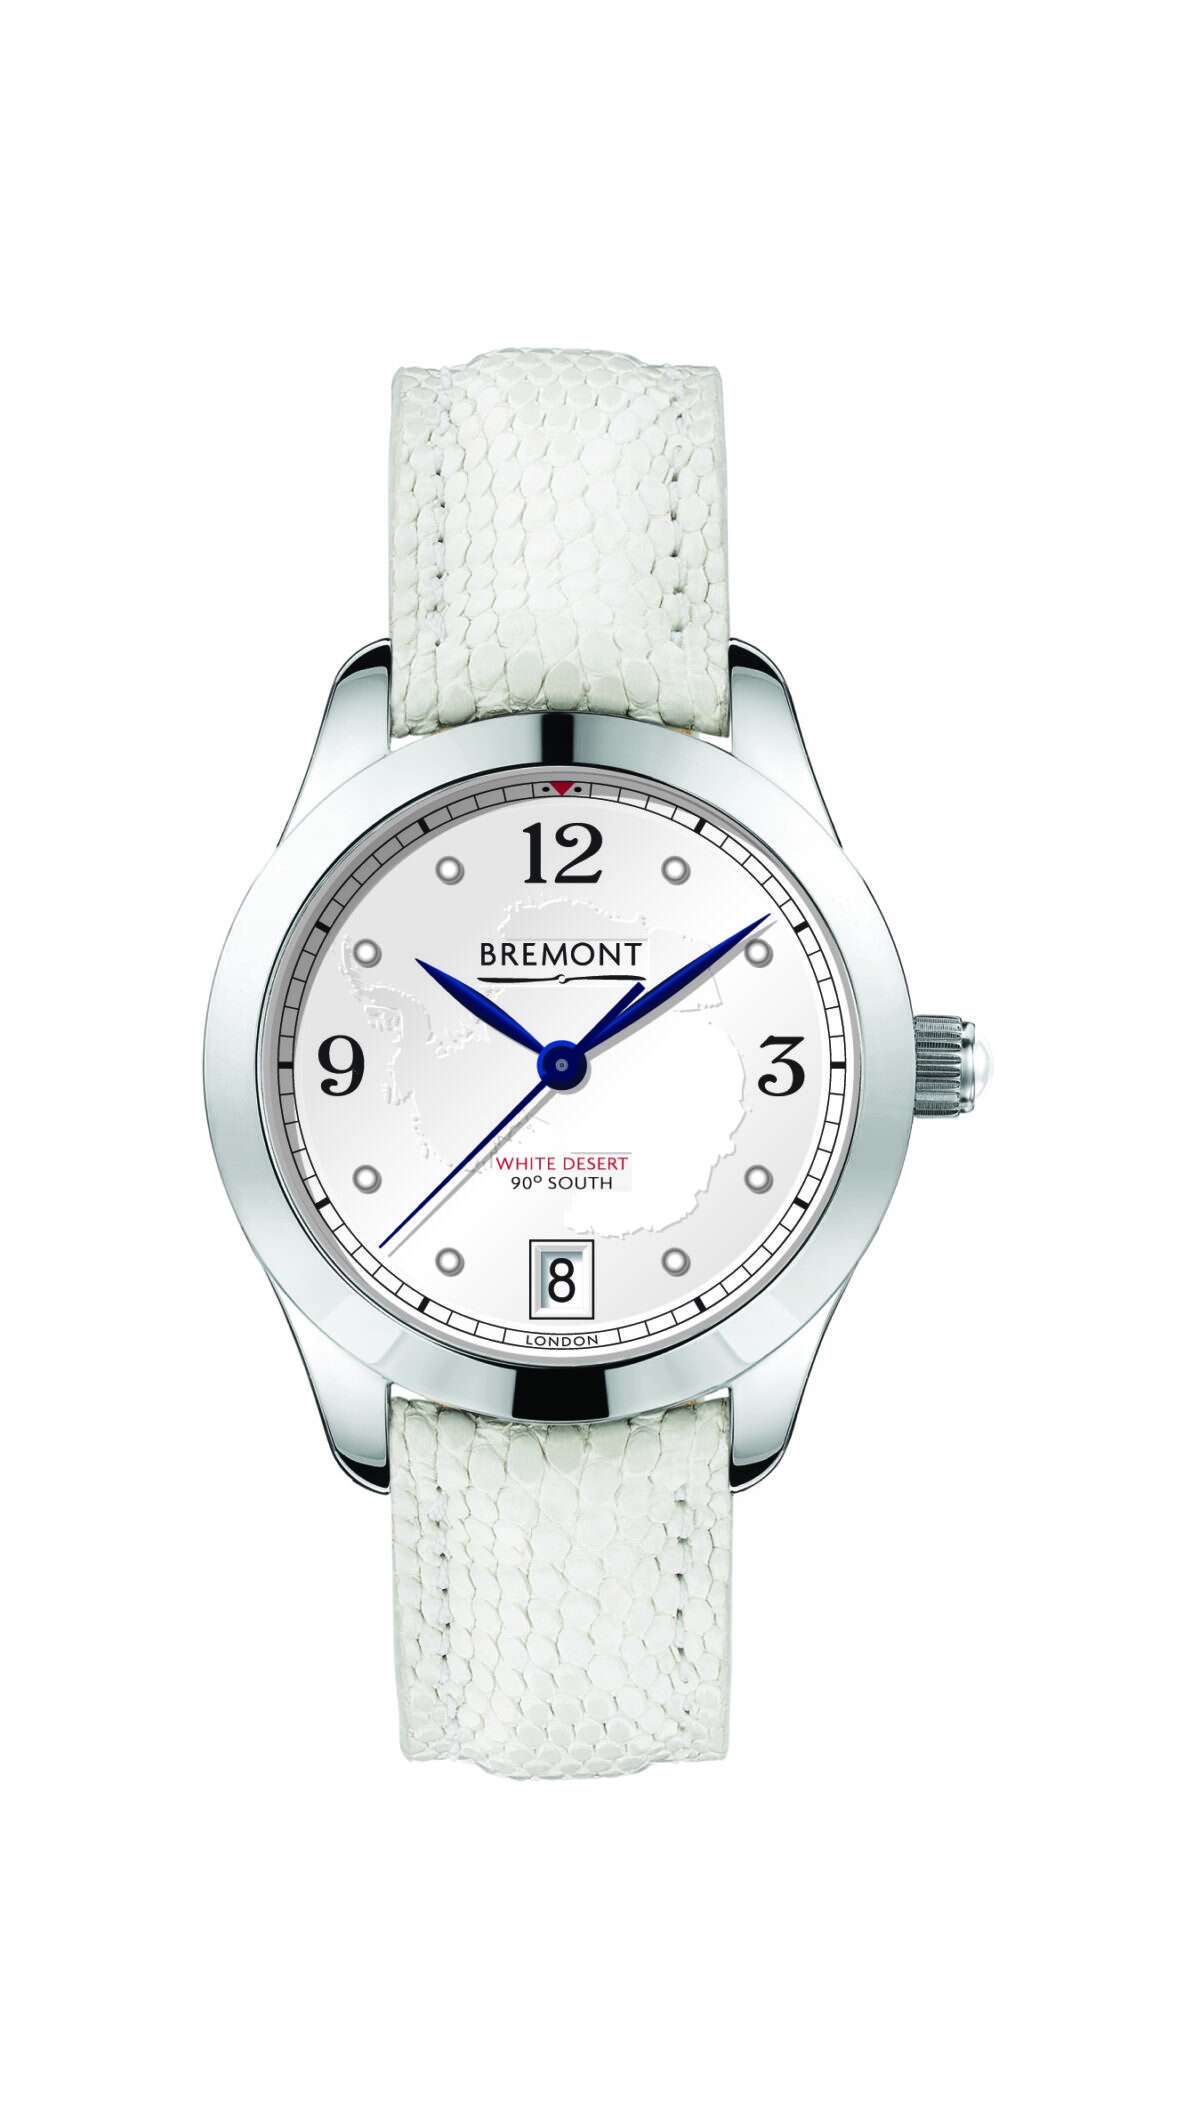 White Desert Collaborates with Bremont to Create Bespoke Watch